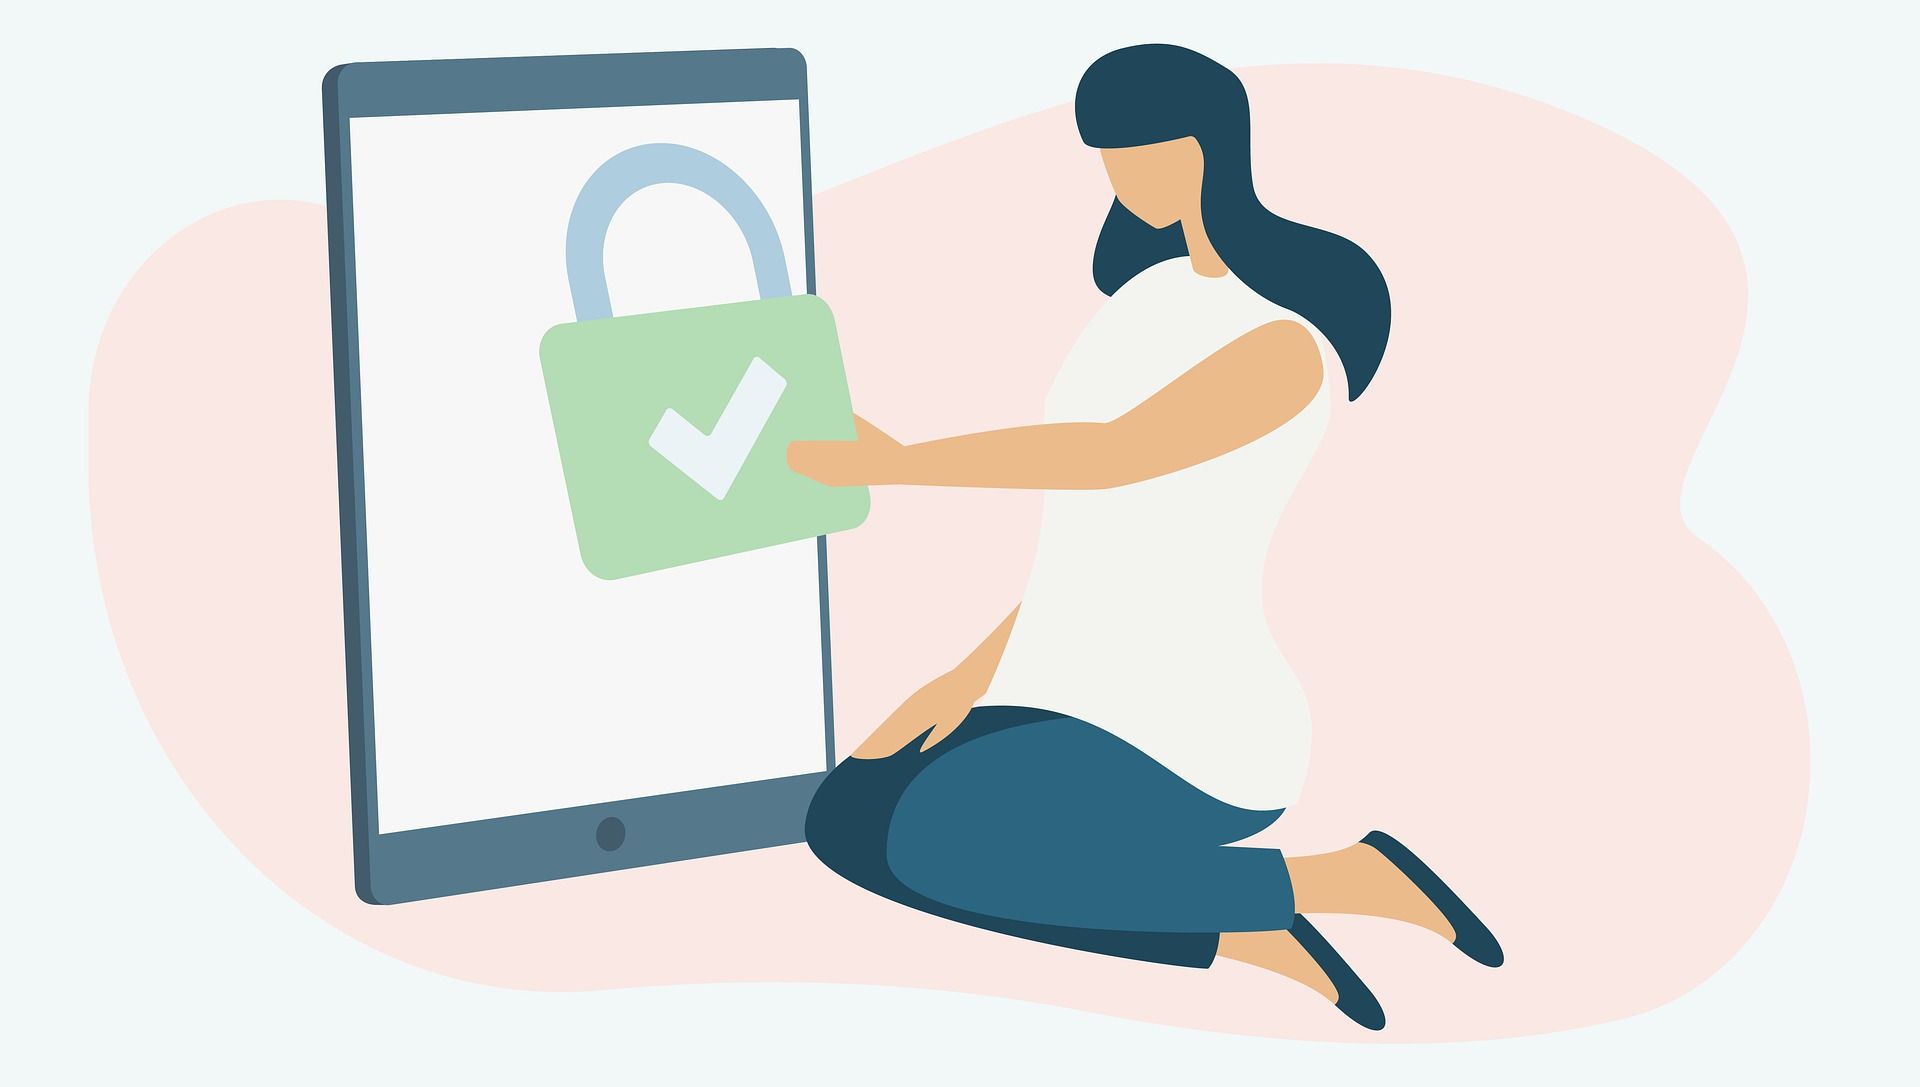 Image shows a dark haired woman in a white short sleeved shirt and dark blue pants kneeling next to a very large tablet which has a green padlock on the screen.  She is reaching out one hand to touch the padlock.